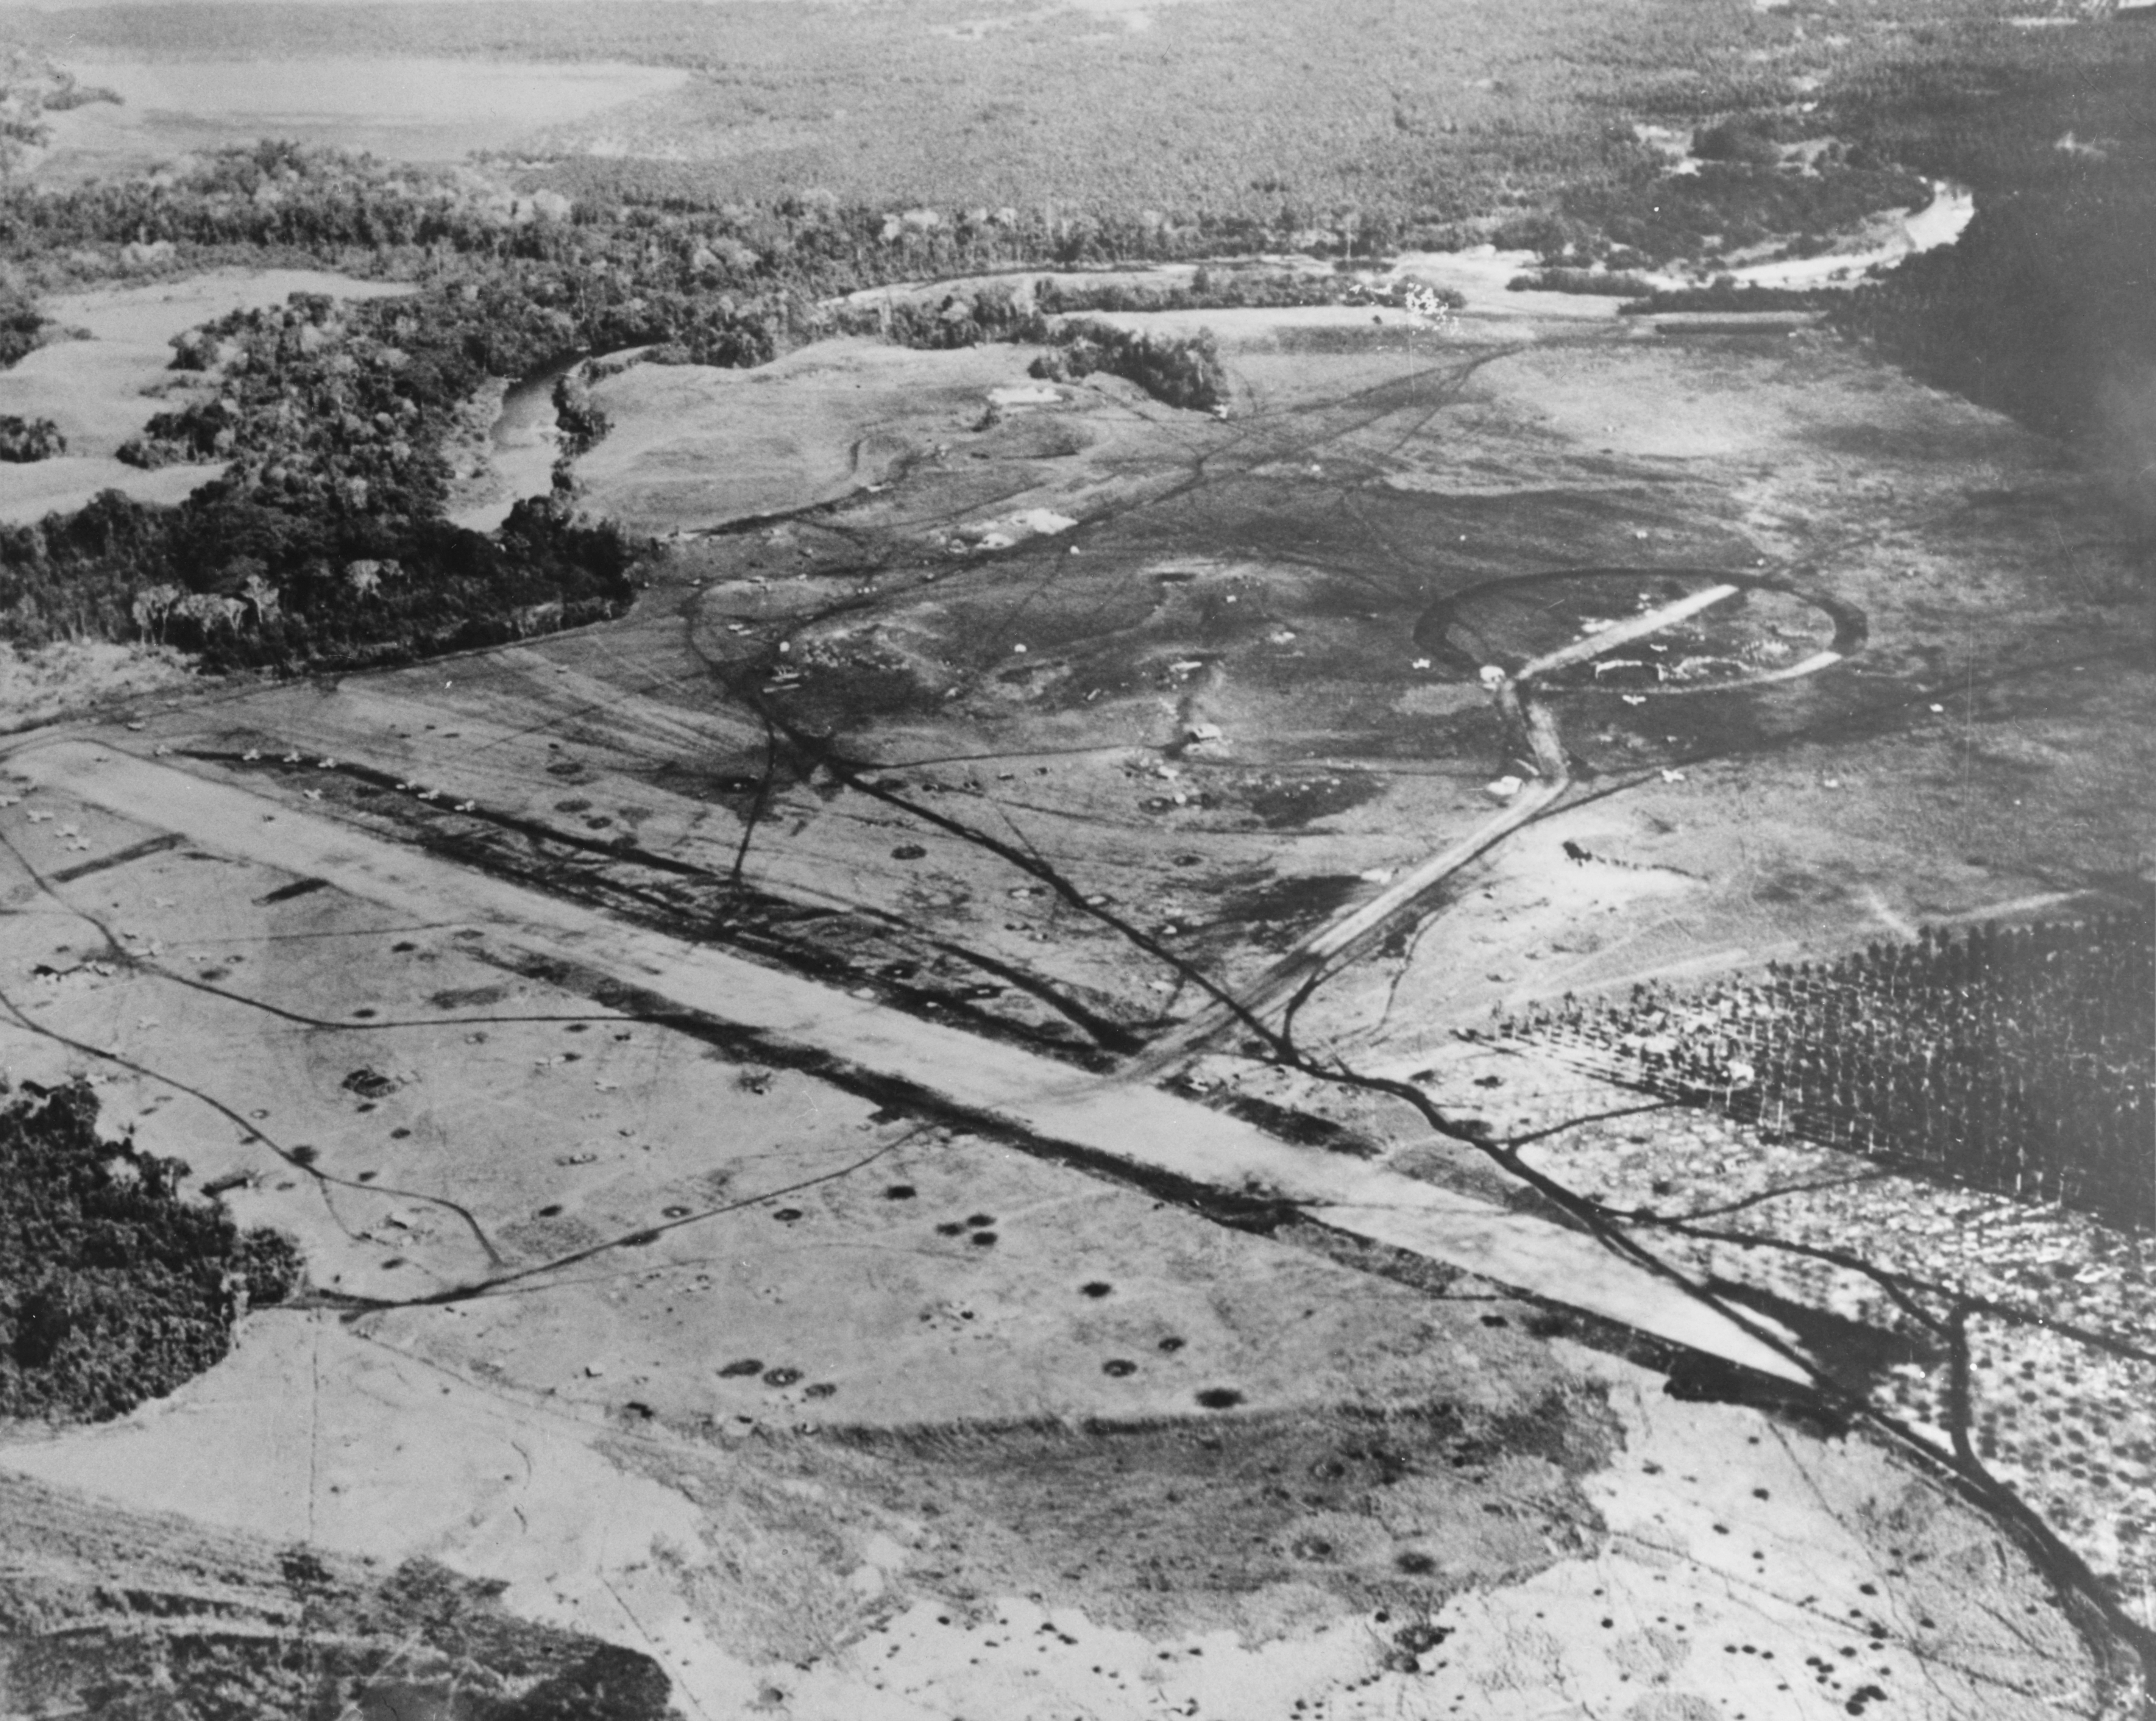 Lunga Point Airfield/Henderson Field, seen from USS Saratoga aircraft, Guadalcanal, Solomon Islands, Aug 1942